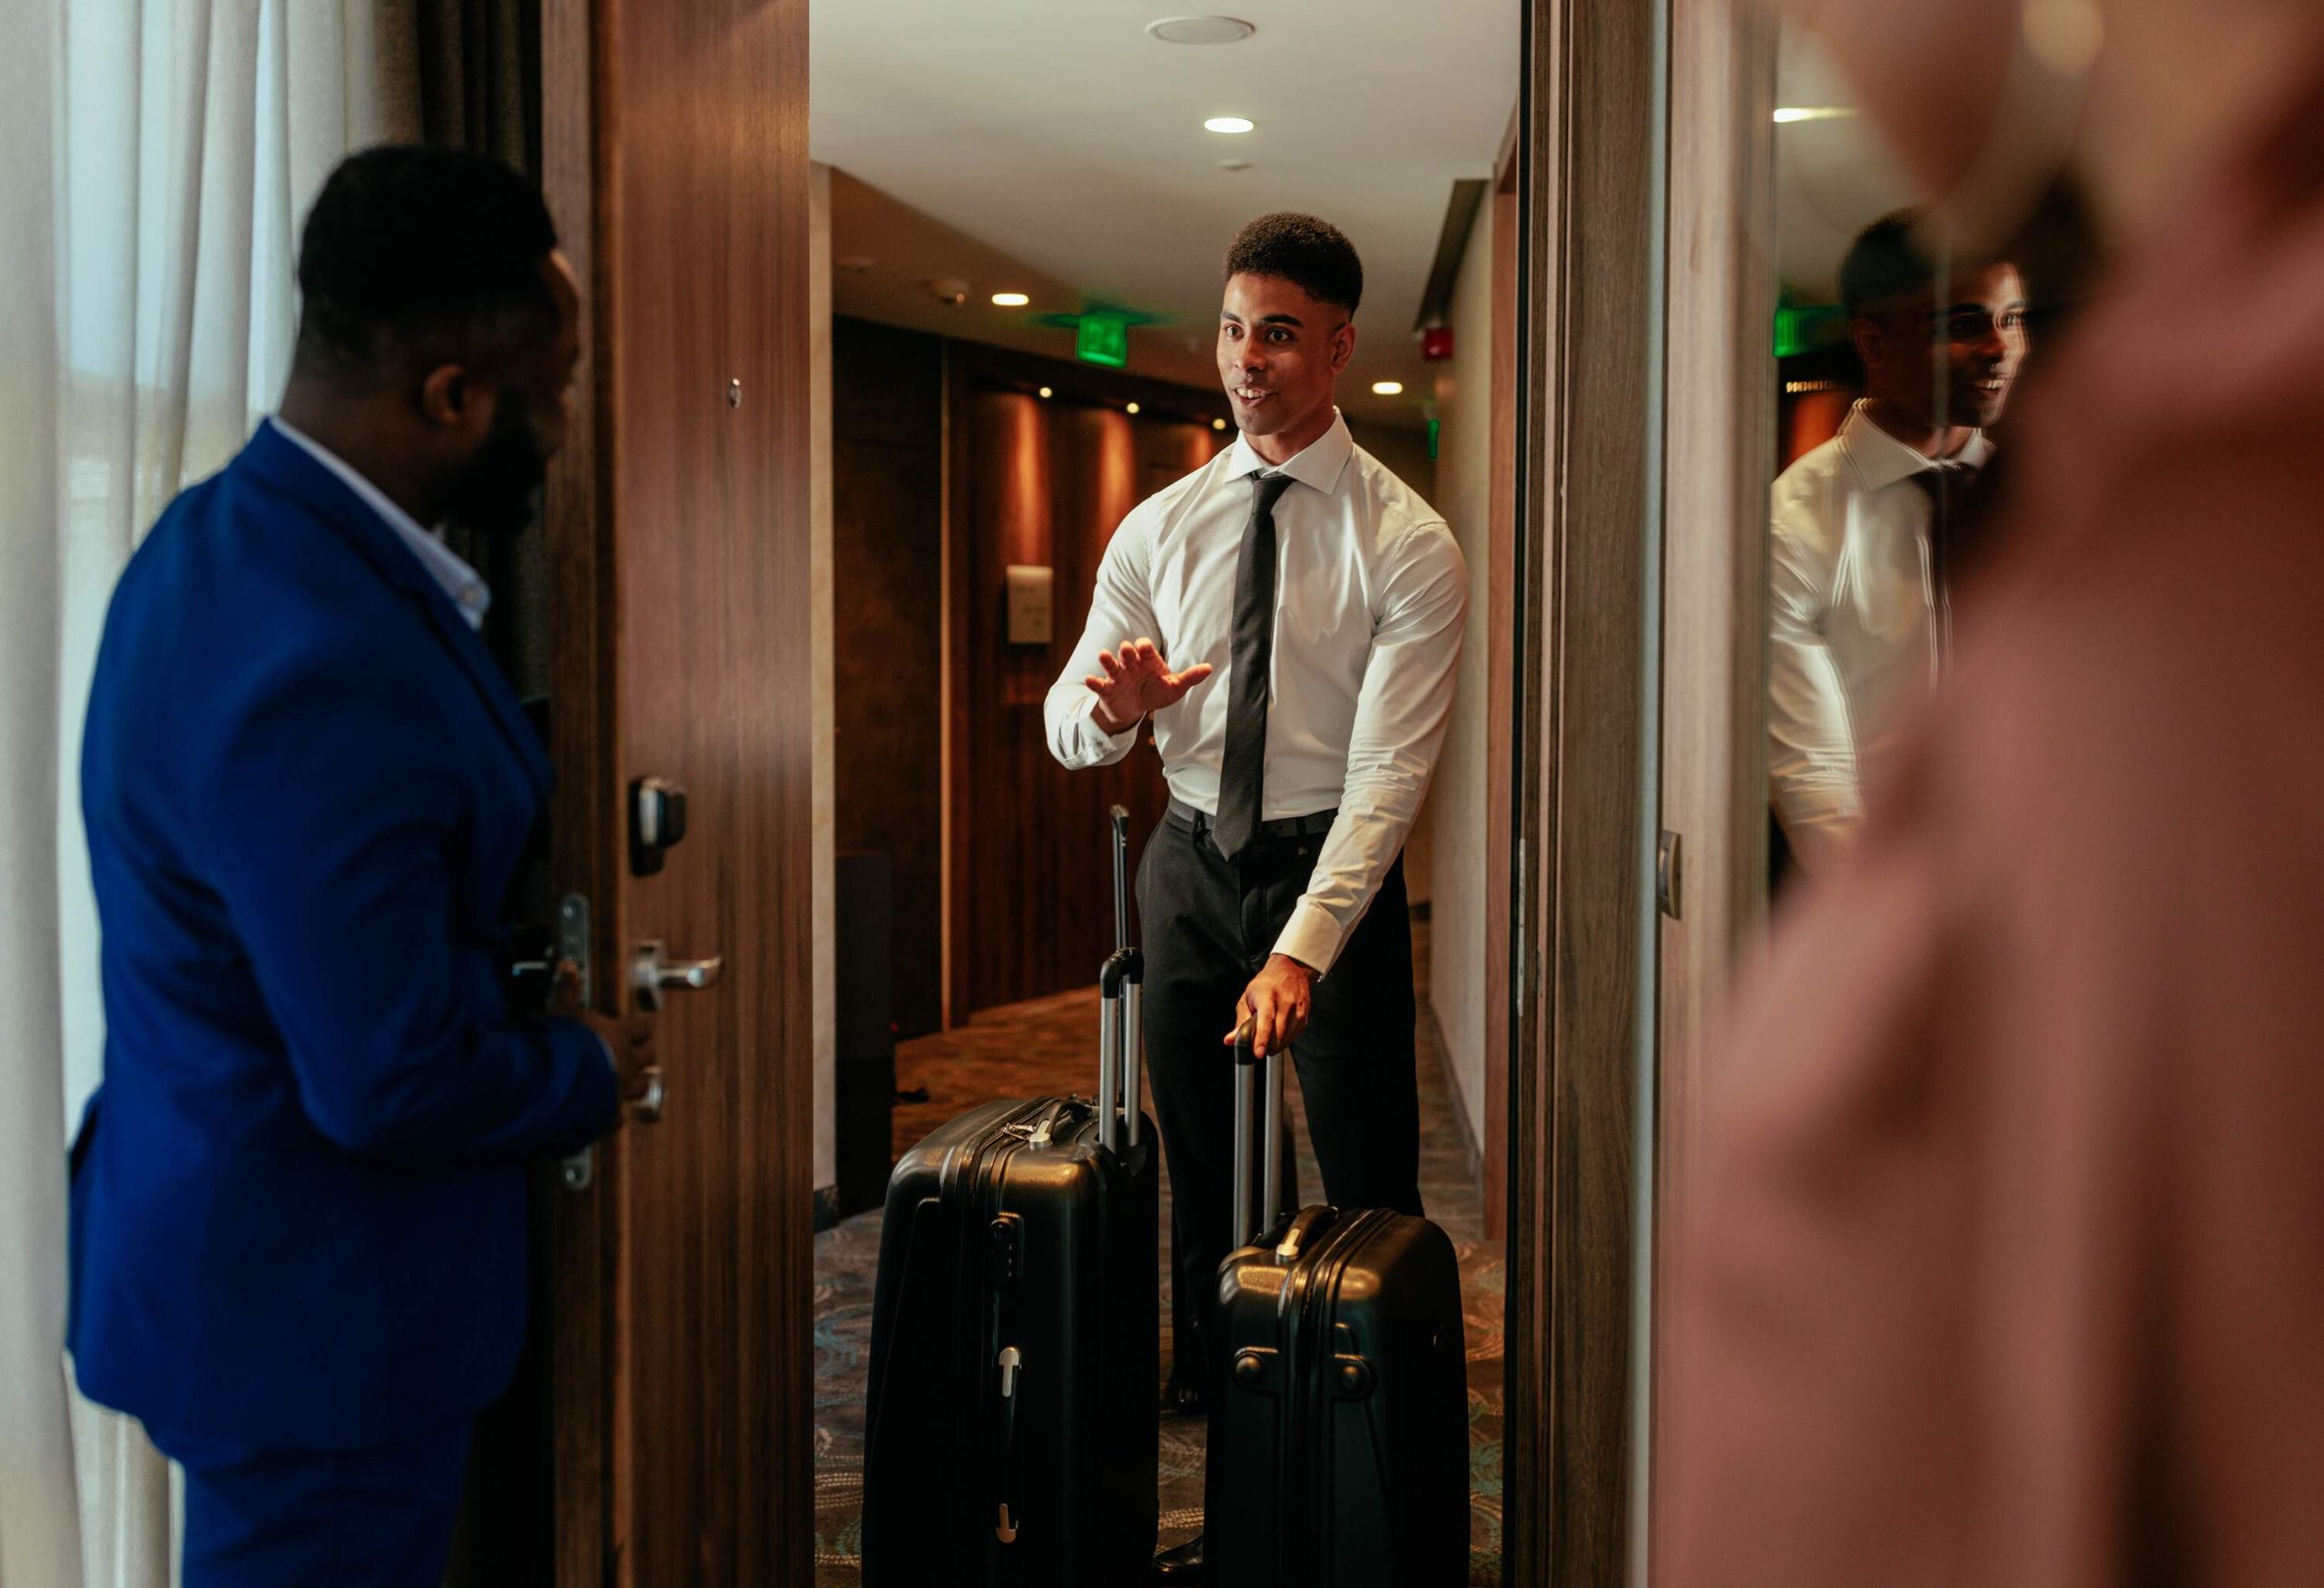 A young hotel attendant is delivering luggage to the hotels VIP guests in the presidential suite.